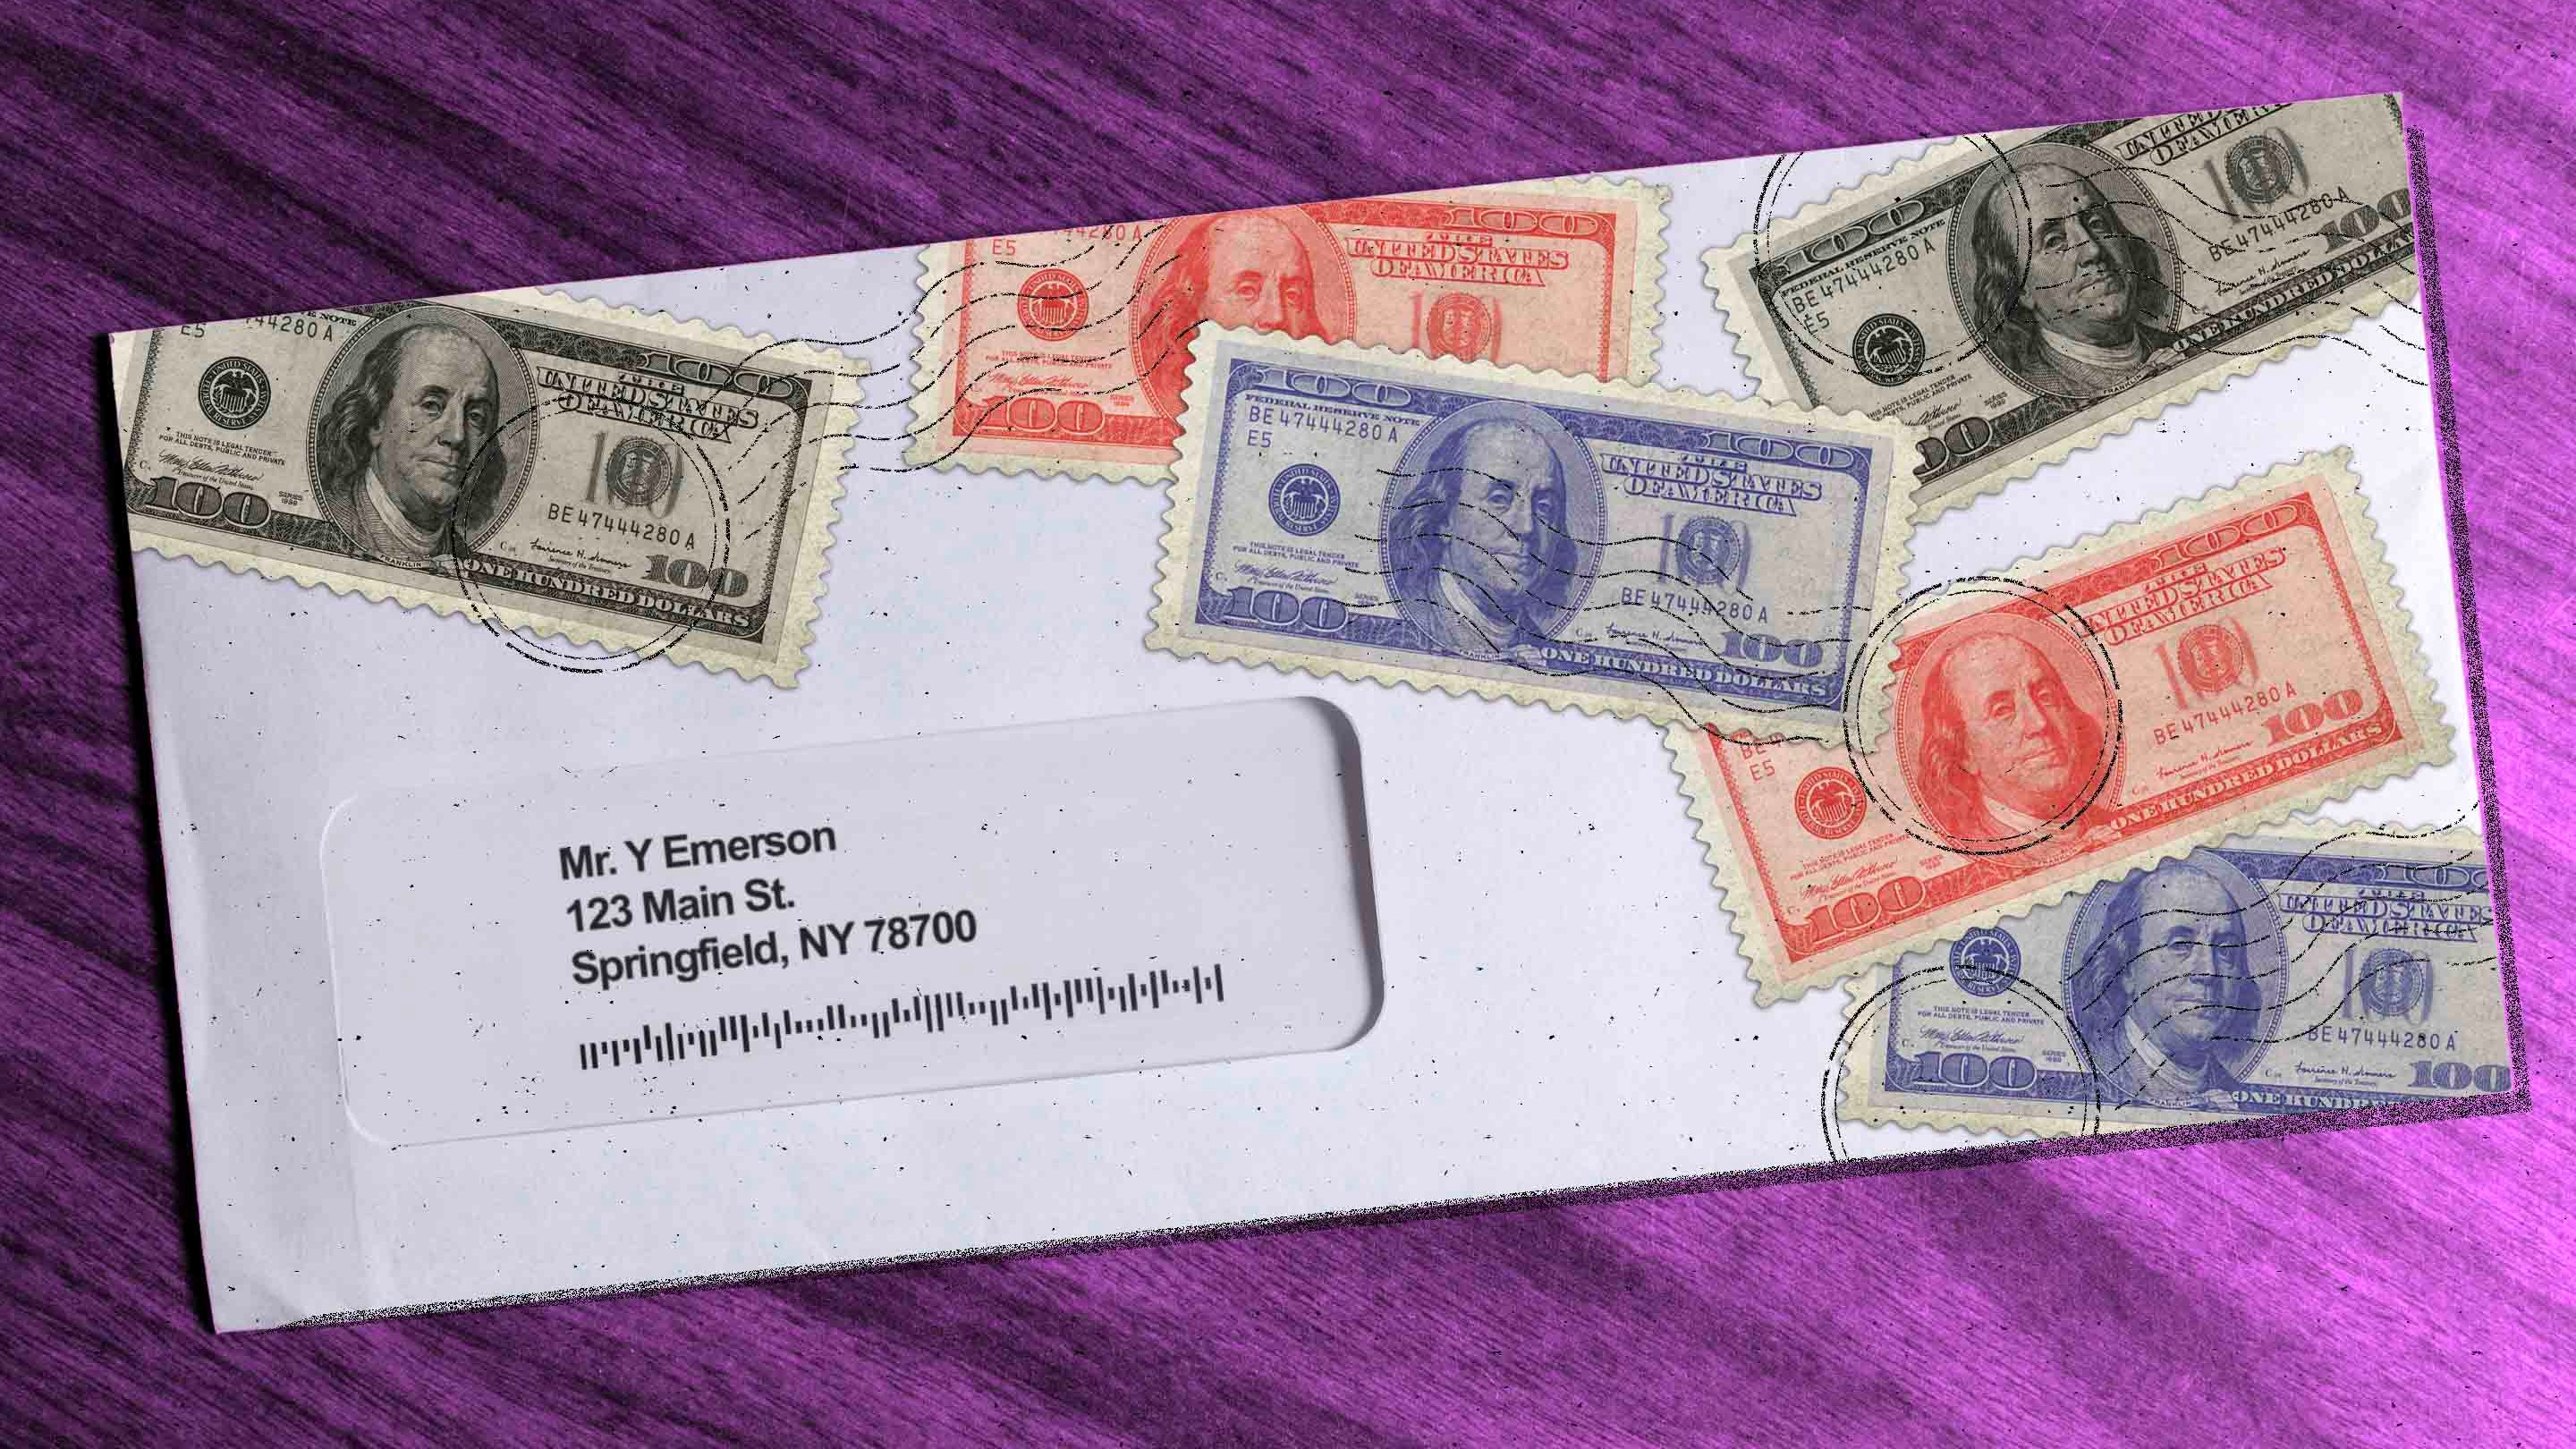 LETTERS: Buy stamps: Help save US Postal Service